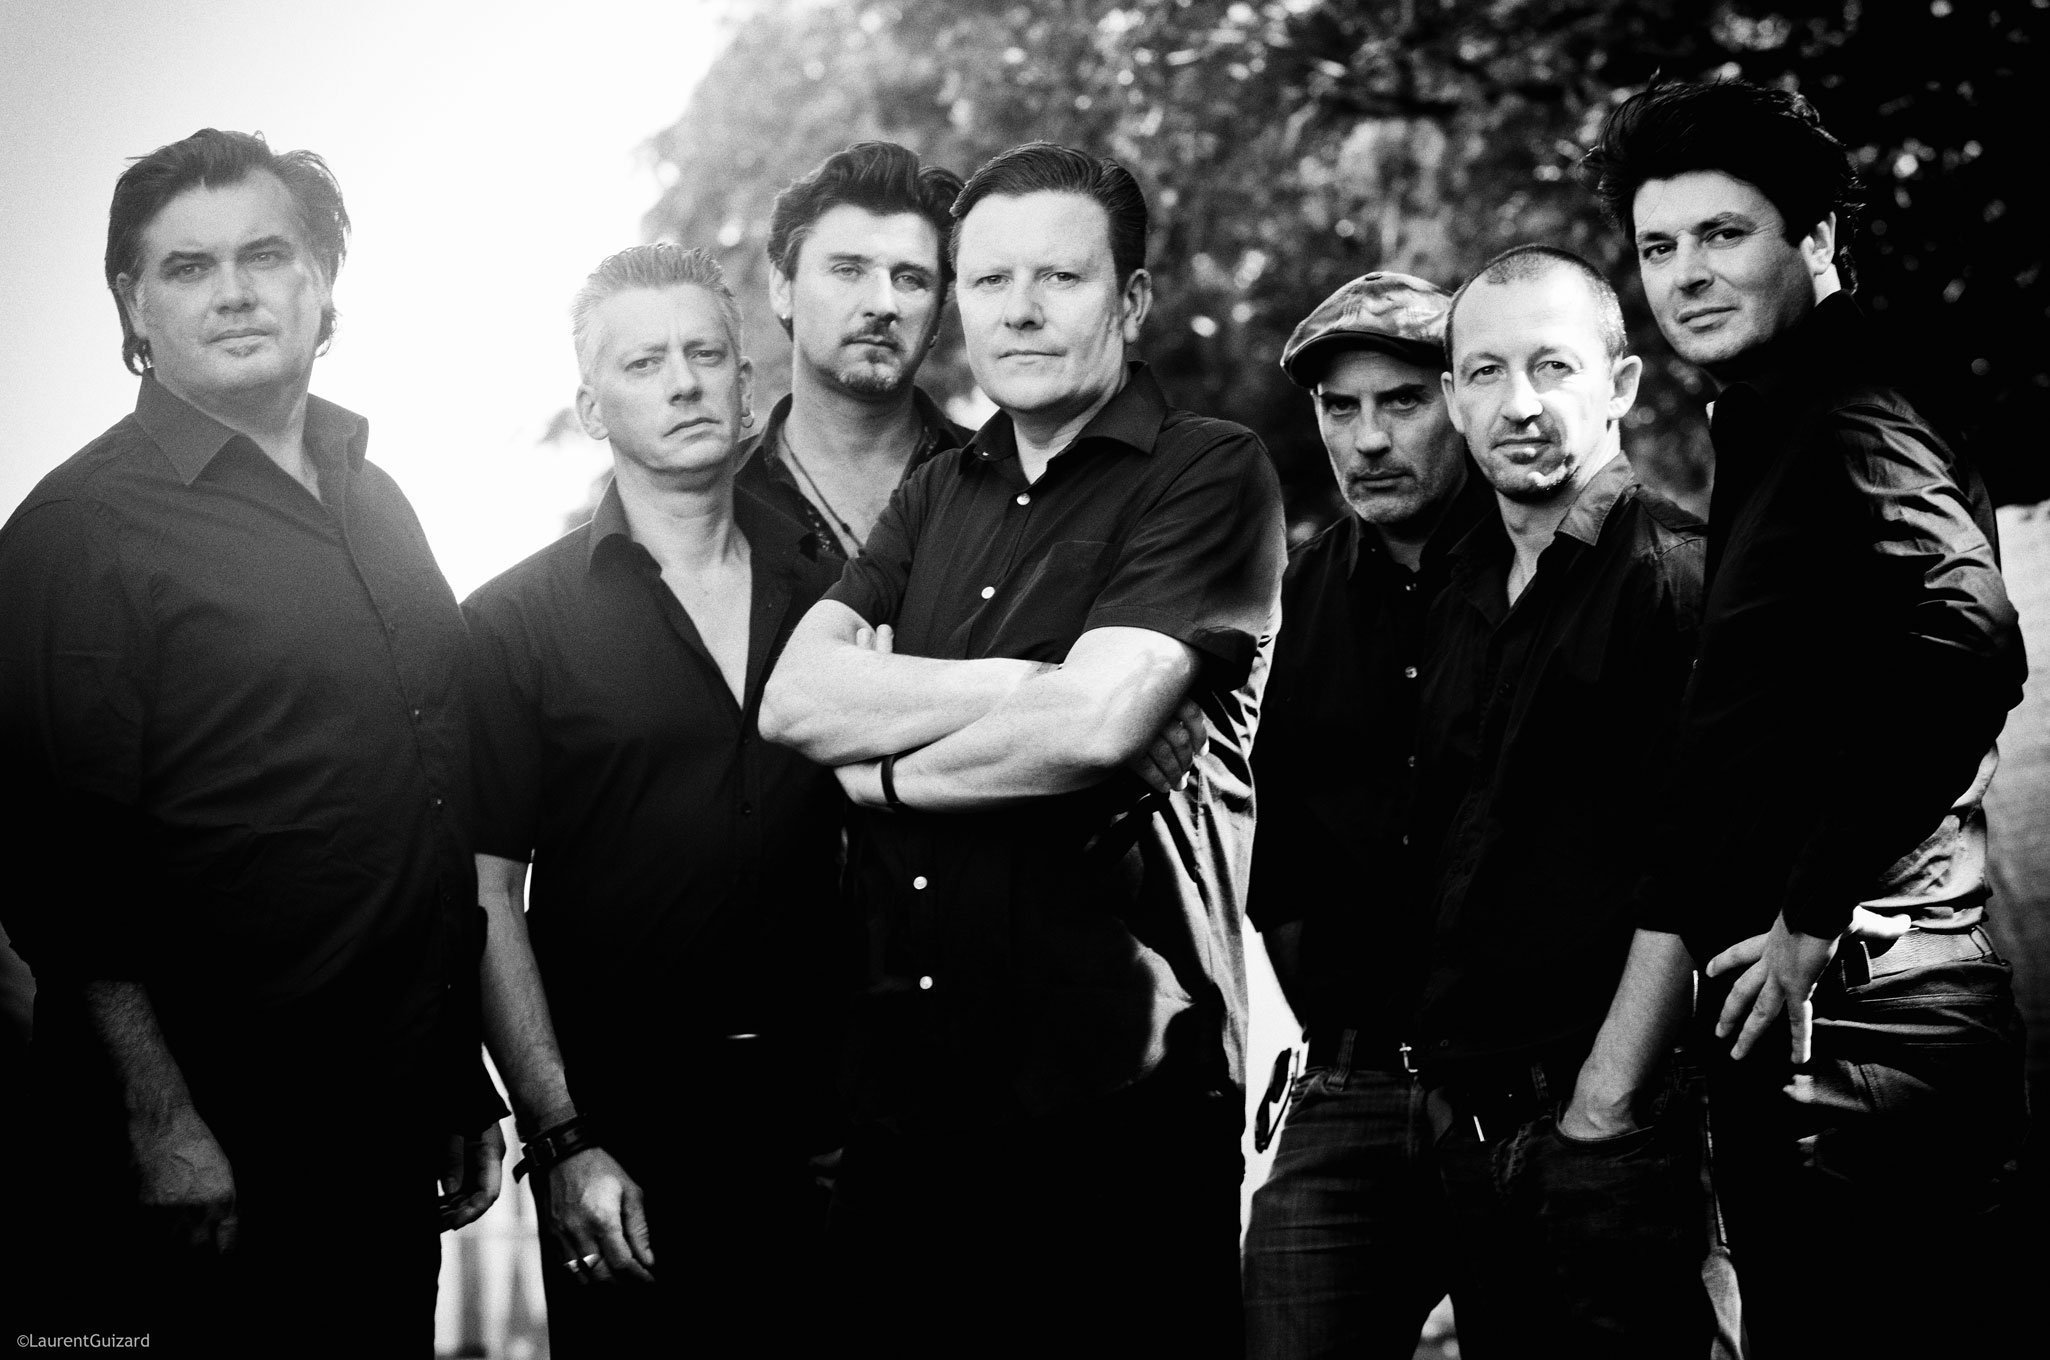 French supergroup THE CELTIC SOCIAL CLUB head to London to play The 100 Club on Sept 7th 1